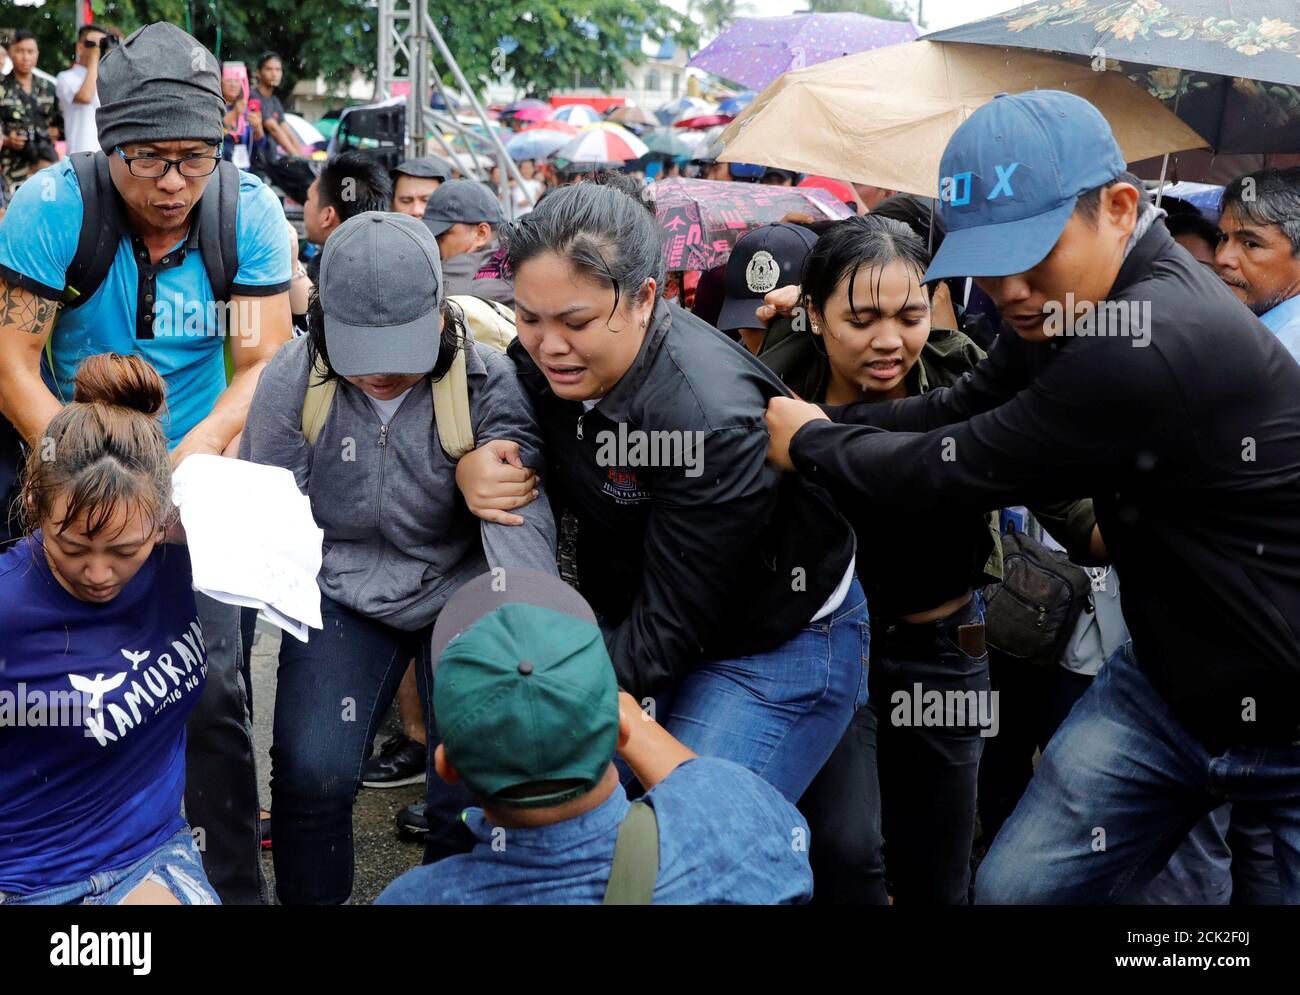 Plainclothes policemen lead away activists who heckled President Rodrigo Duterte while speaking during the 120th Philippine Independence day celebration at the Emilio Aguinaldo shrine in Kawit, Cavite Philippines June 12, 2018. REUTERS/Erik De Castro Stock Photo